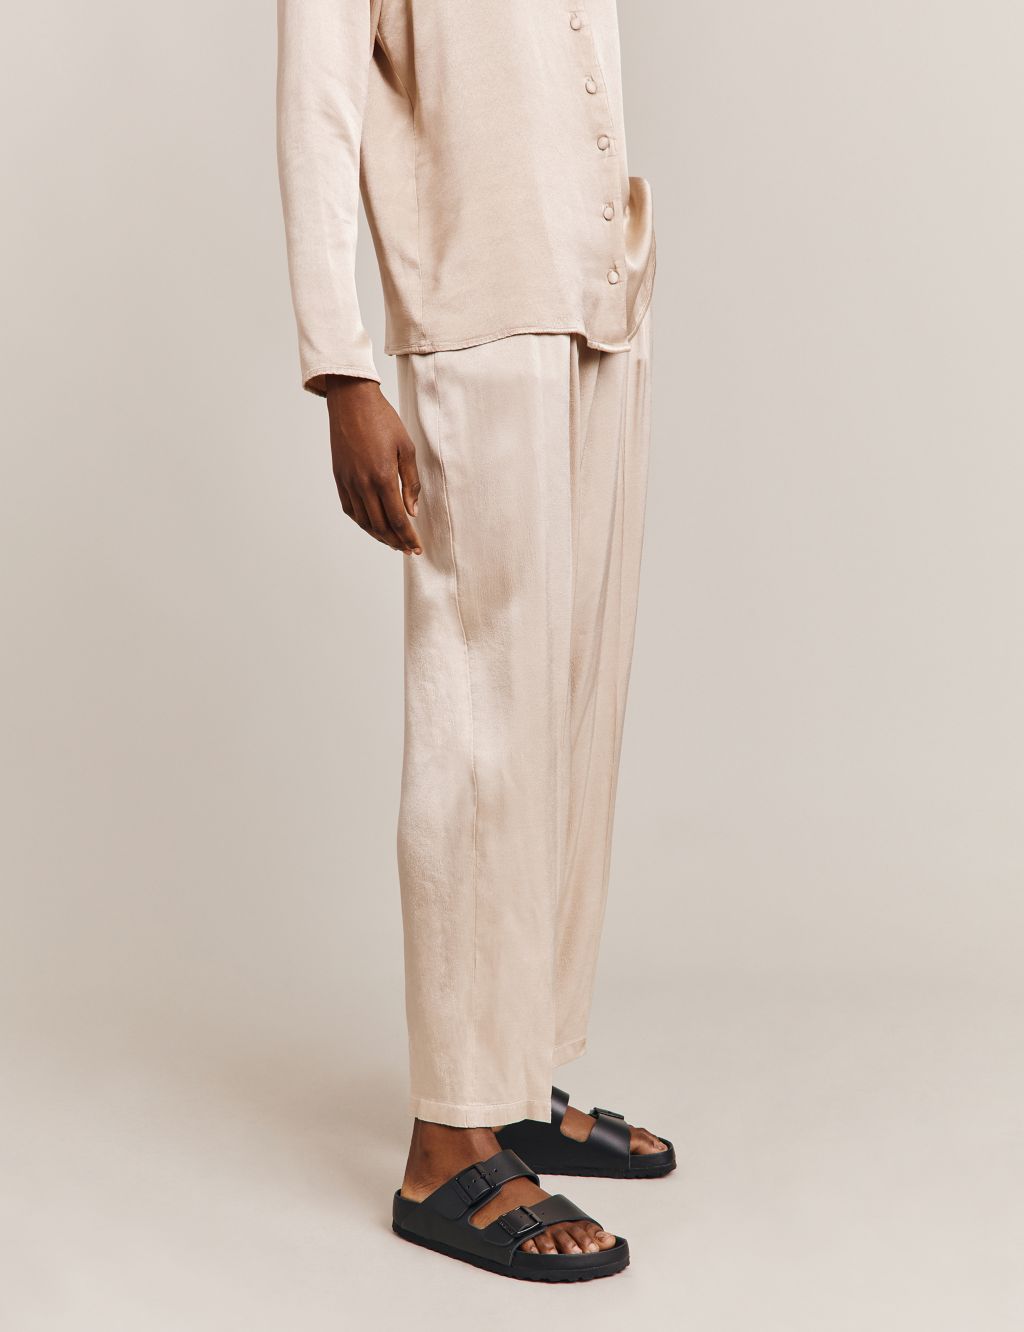 Satin Tapered Trousers image 3